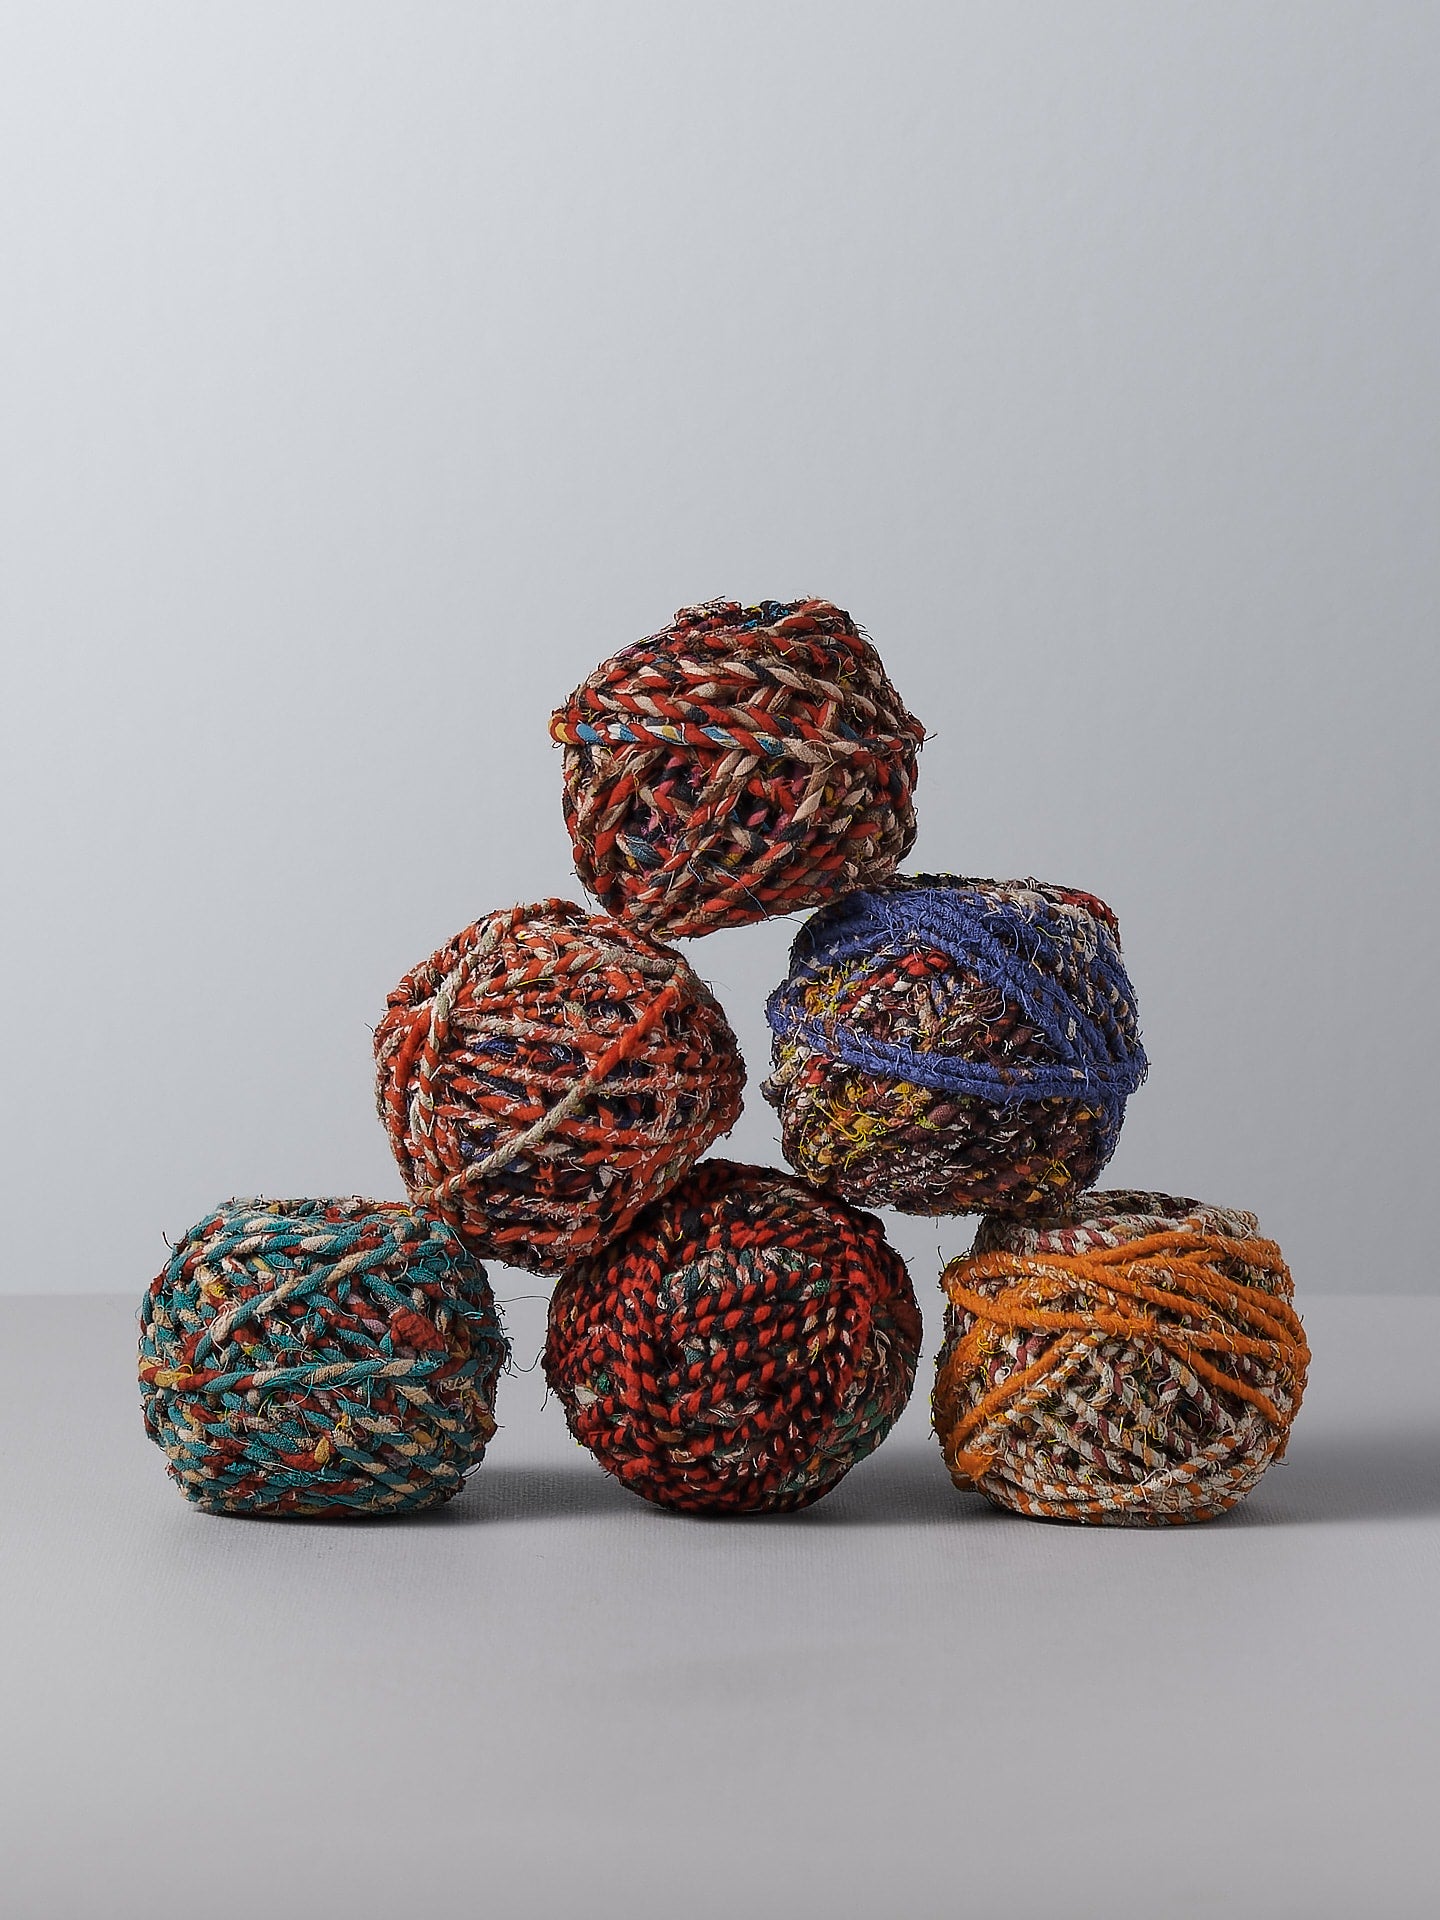 A group of Stitchwallah Recycled Sari Twine – 25𝗆 on a white surface.